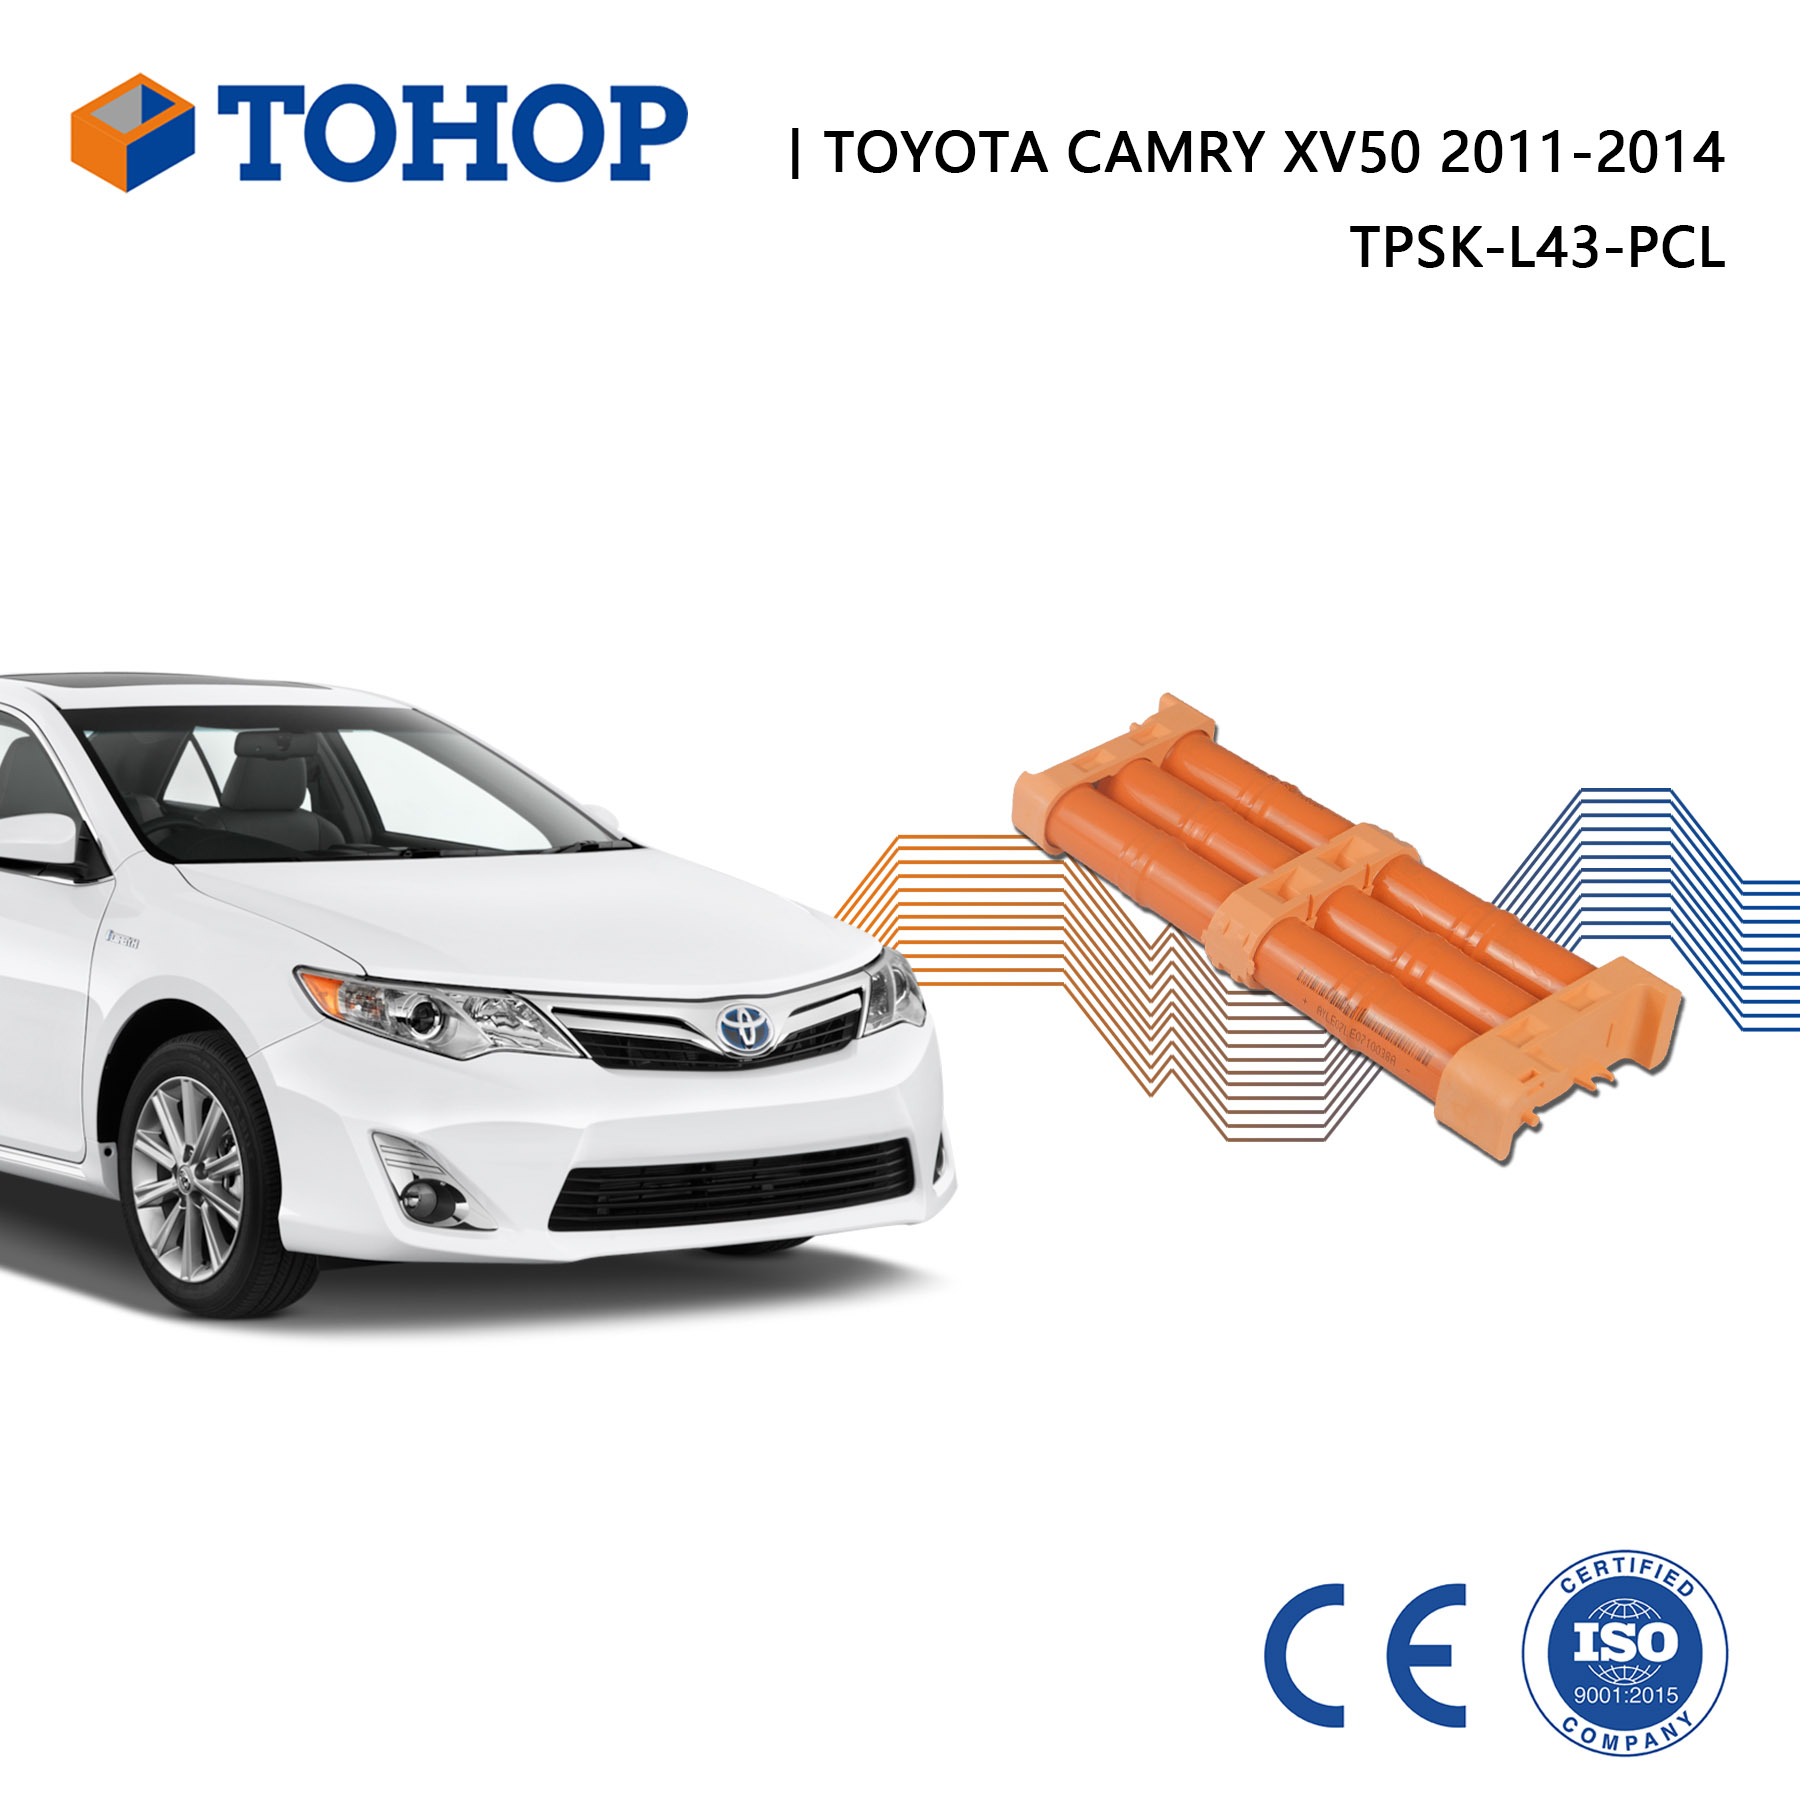 Camry XLE Hybrid Car Battery 2012-2016 for Toyota Replacement Camry XV50 Nimh Hybrid Battery